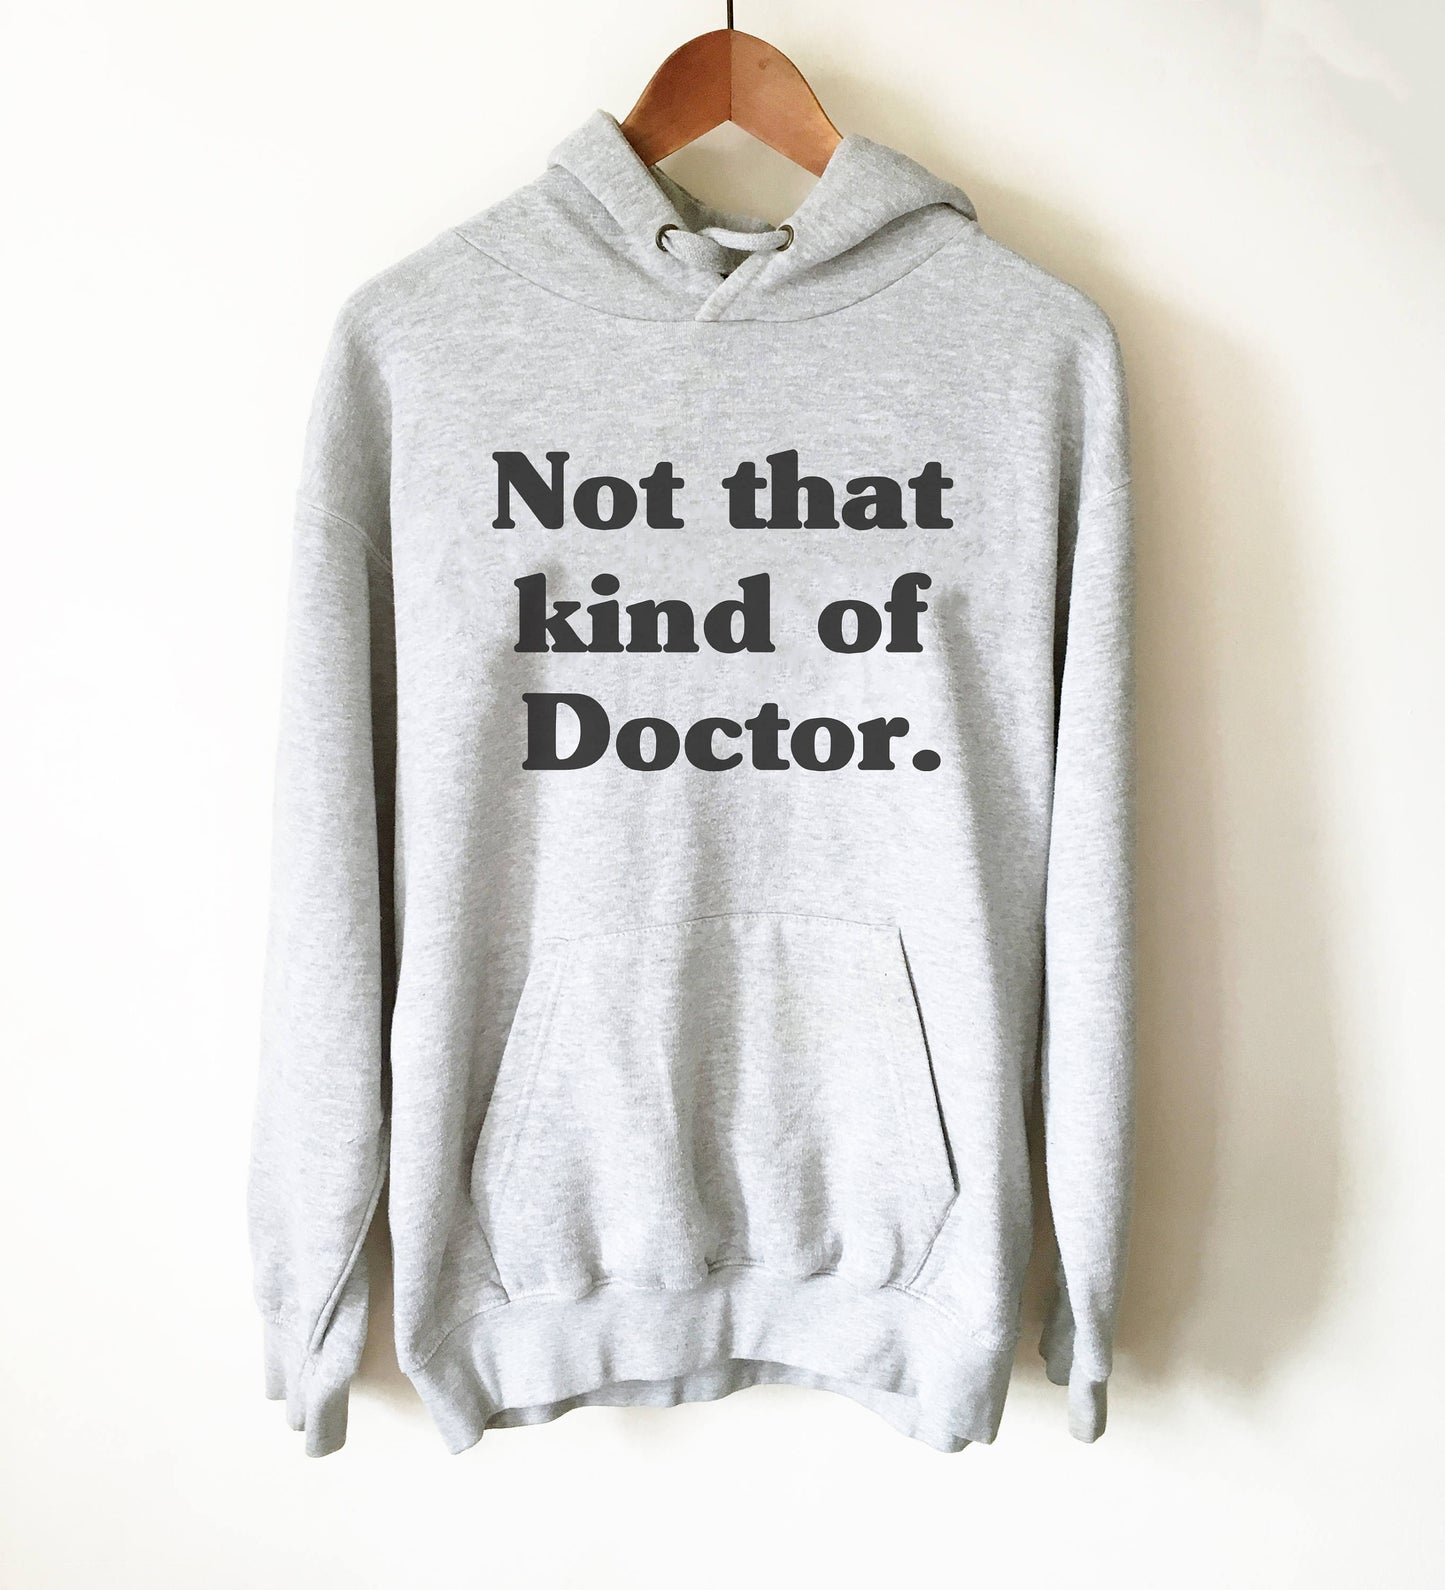 Not That Kind Of Doctor Hoodie - - phd graduation gift - Doctor Gift For Her - Funny Doctor T-Shirt - Unique Doctor Shirt